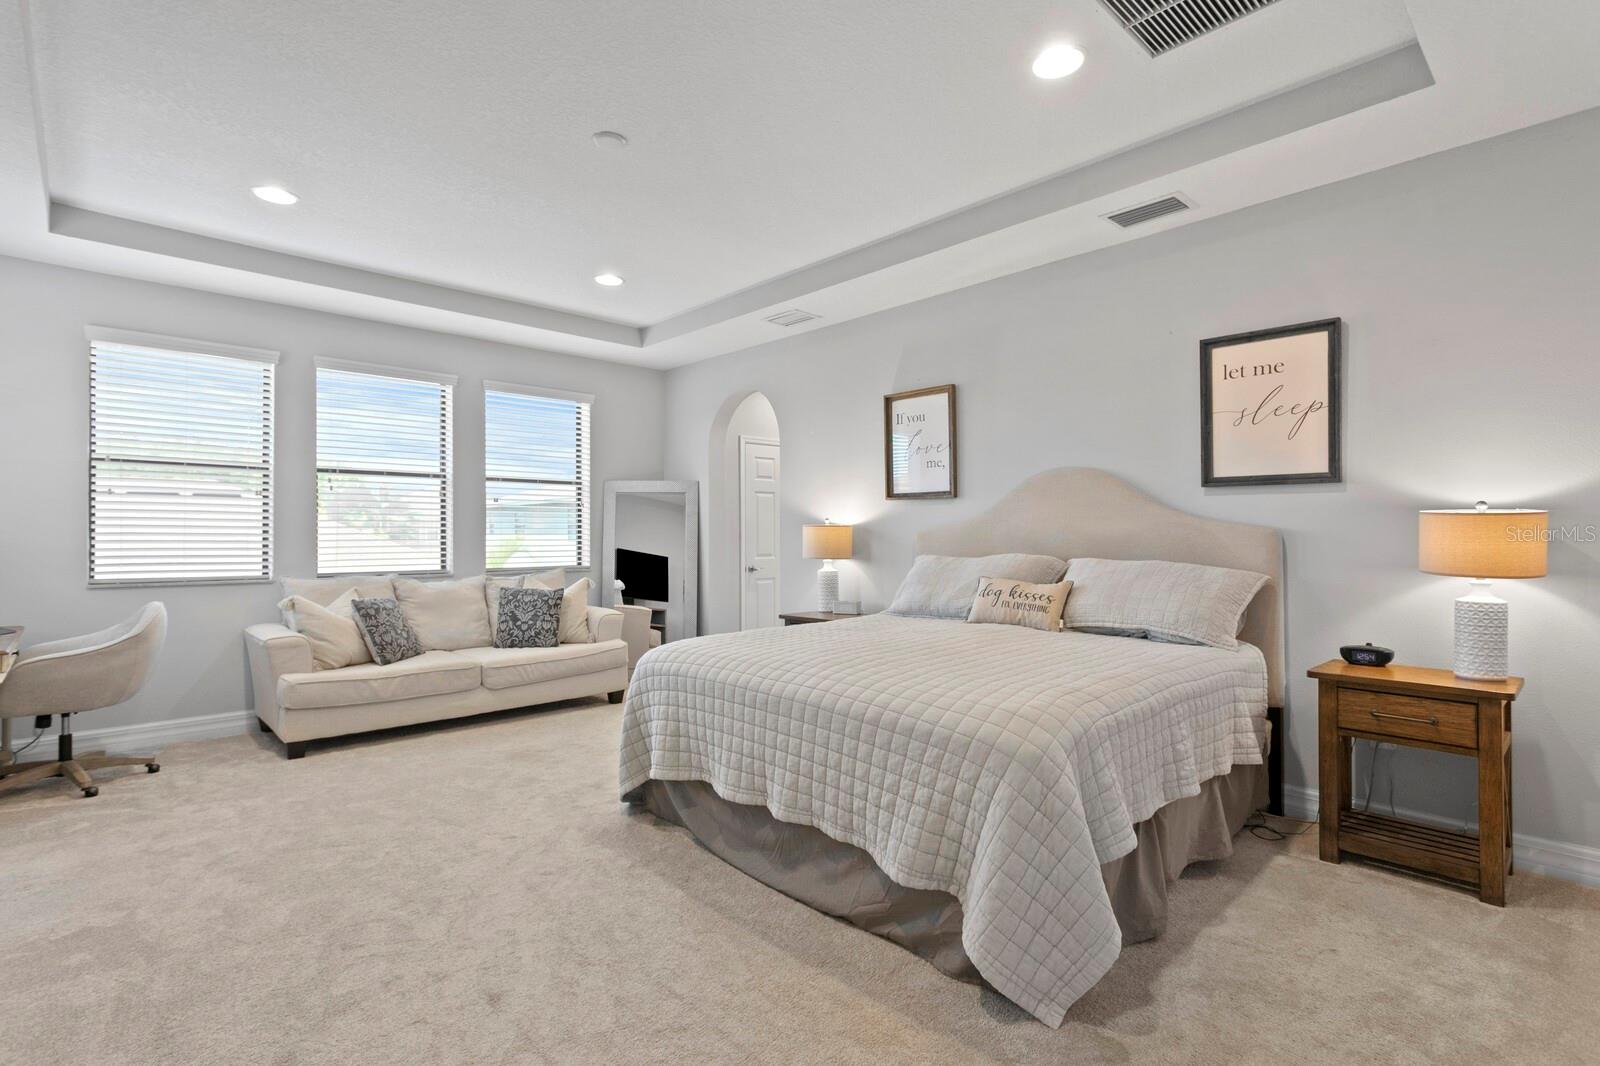 The Primary Suite features tray ceilings and an owner's living room space.